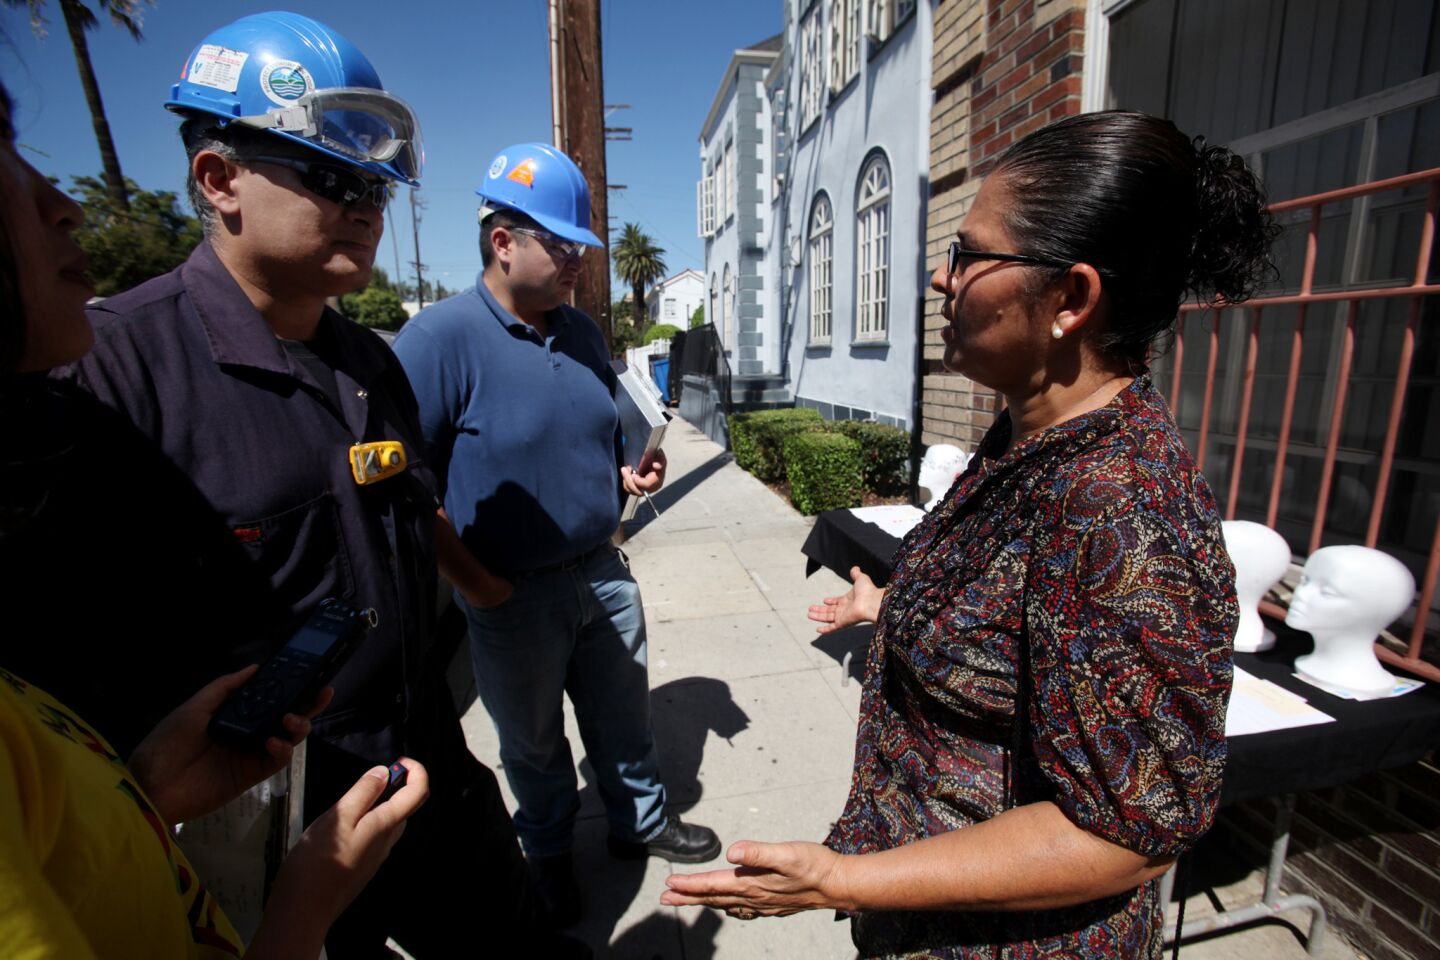 Paul Caballero, left, and Jose Enriquez, center, air quality inspectors with the AQMD, speak with Monic Uriarte in front of her building in the University Park neighborhood in Los Angeles.